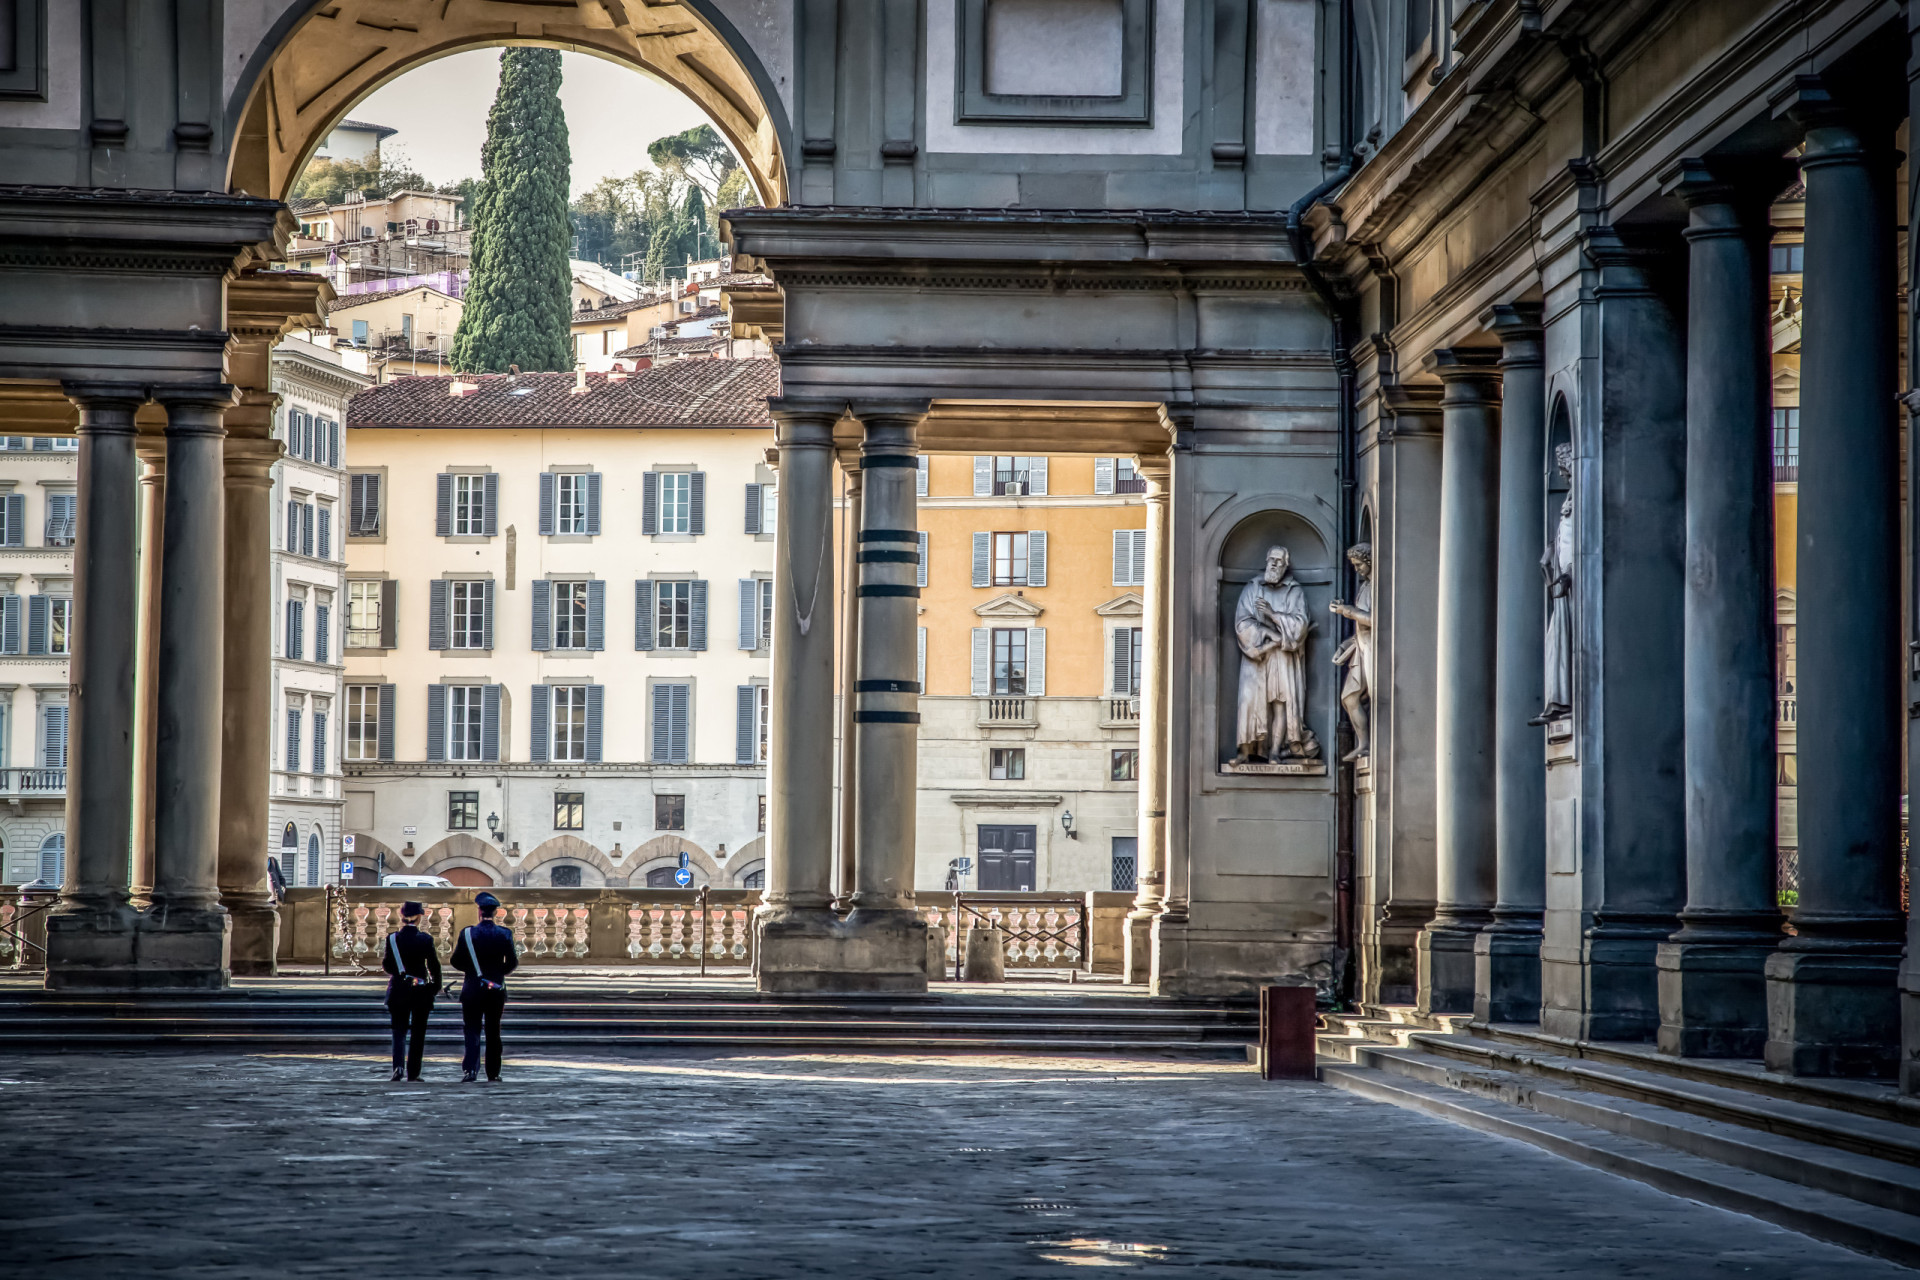 <p>Be careful when perusing the masterpieces of the Uffizi Gallery in Florence, as this is a popular pickpocketing spot.</p><p>You may also like:<a href="https://www.starsinsider.com/n/280372?utm_source=msn.com&utm_medium=display&utm_campaign=referral_description&utm_content=717448en-us"> The most re-watchable movies</a></p>